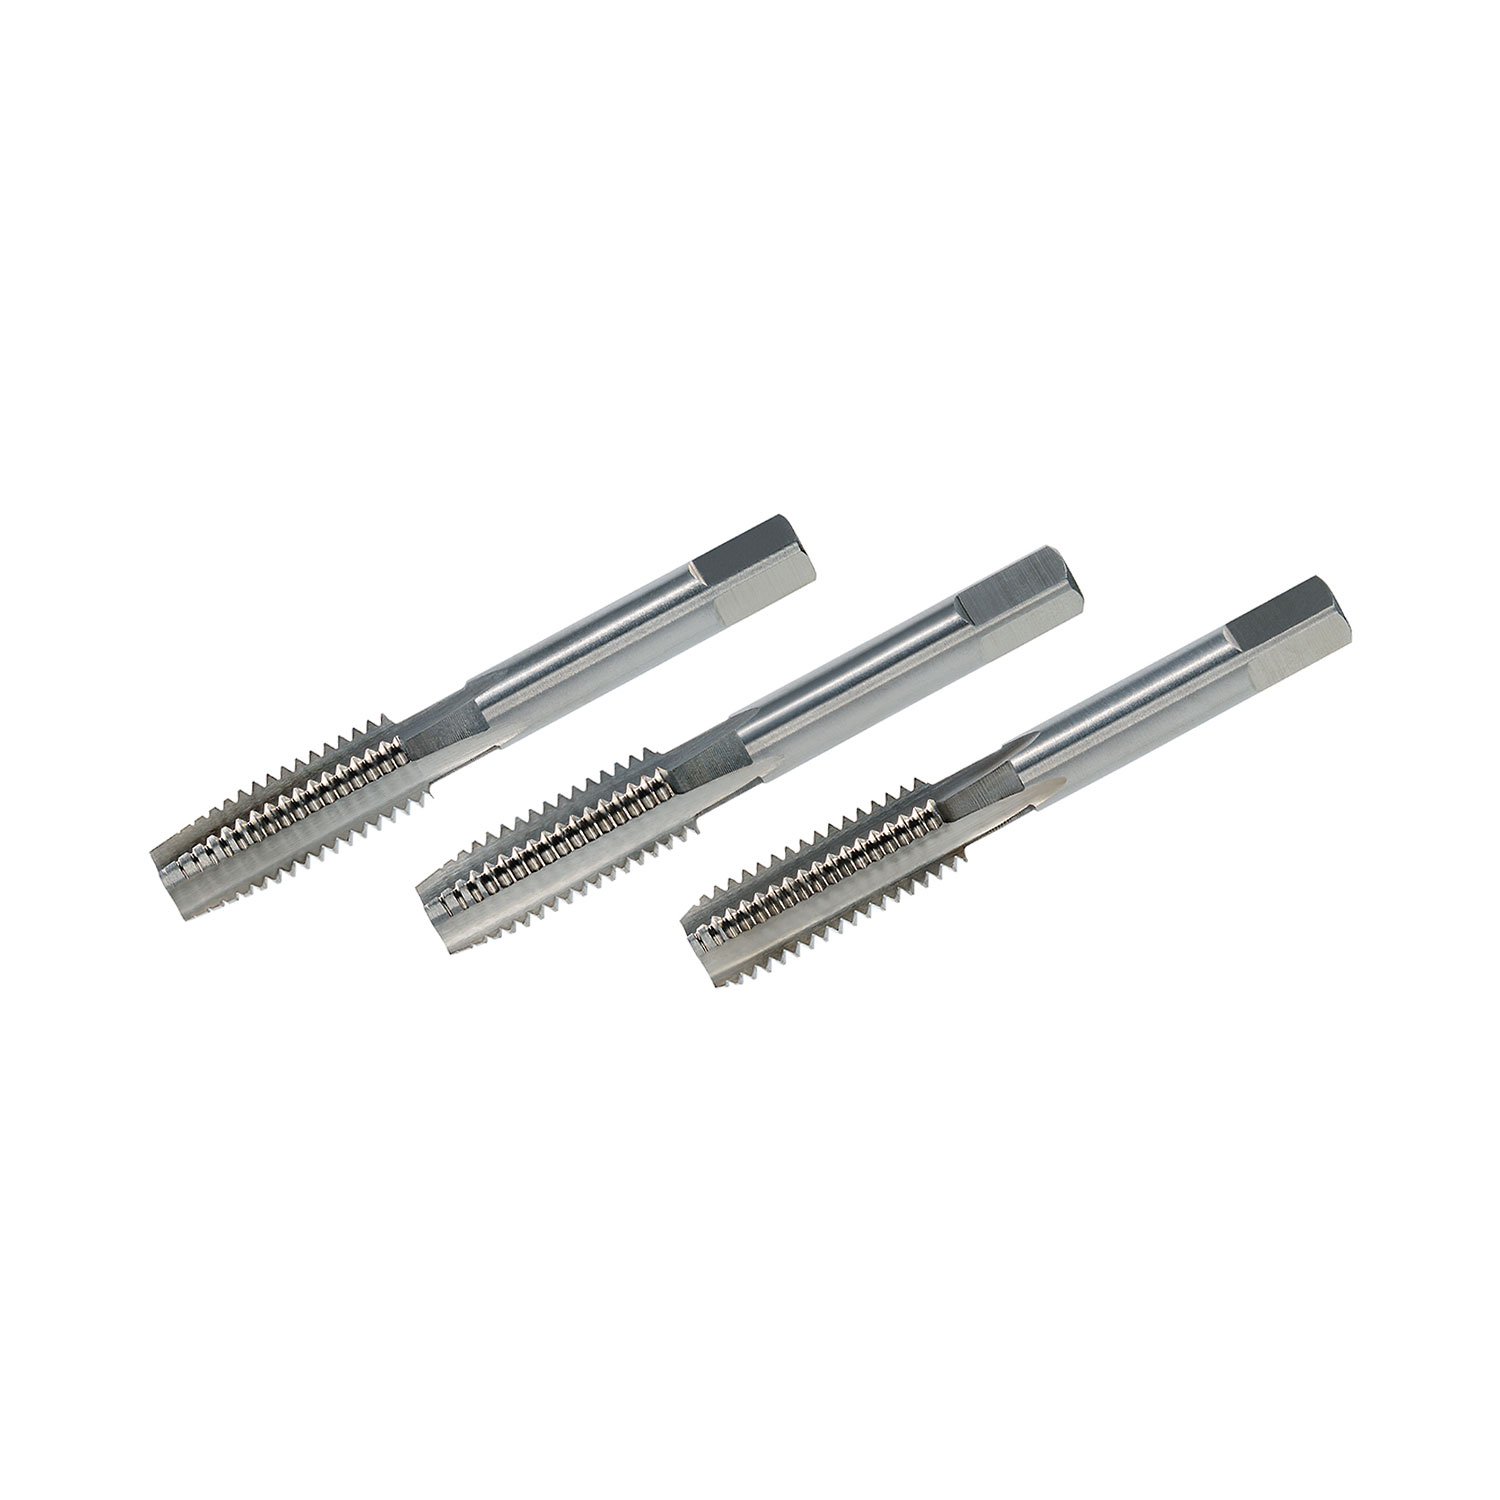 Hand Tap set of 3 pieces DIN 352 HSS-G non-serial form - M 20 x 2.5